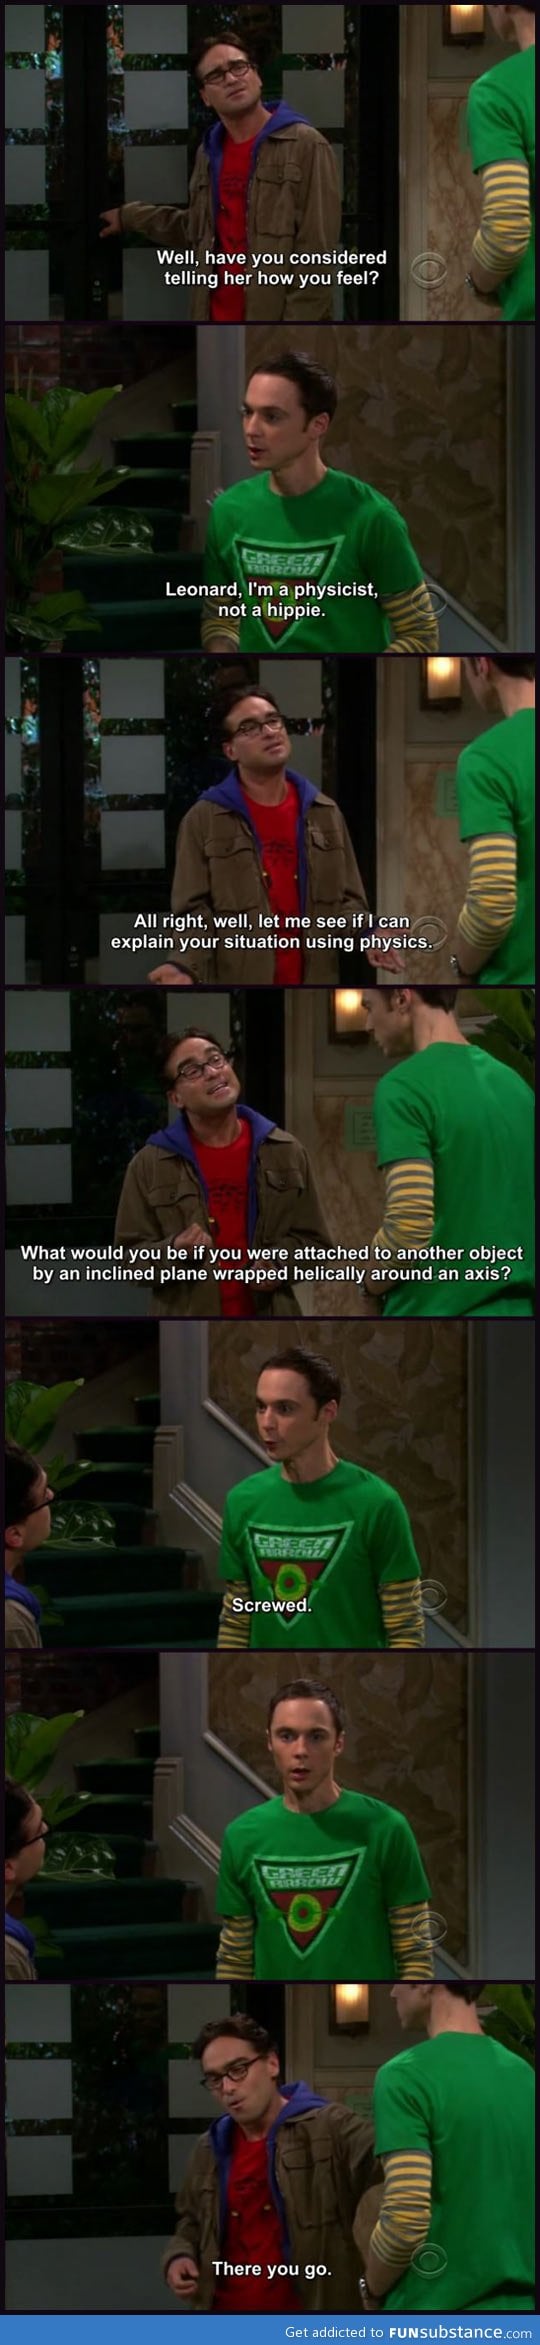 sheldon cooper is awesome